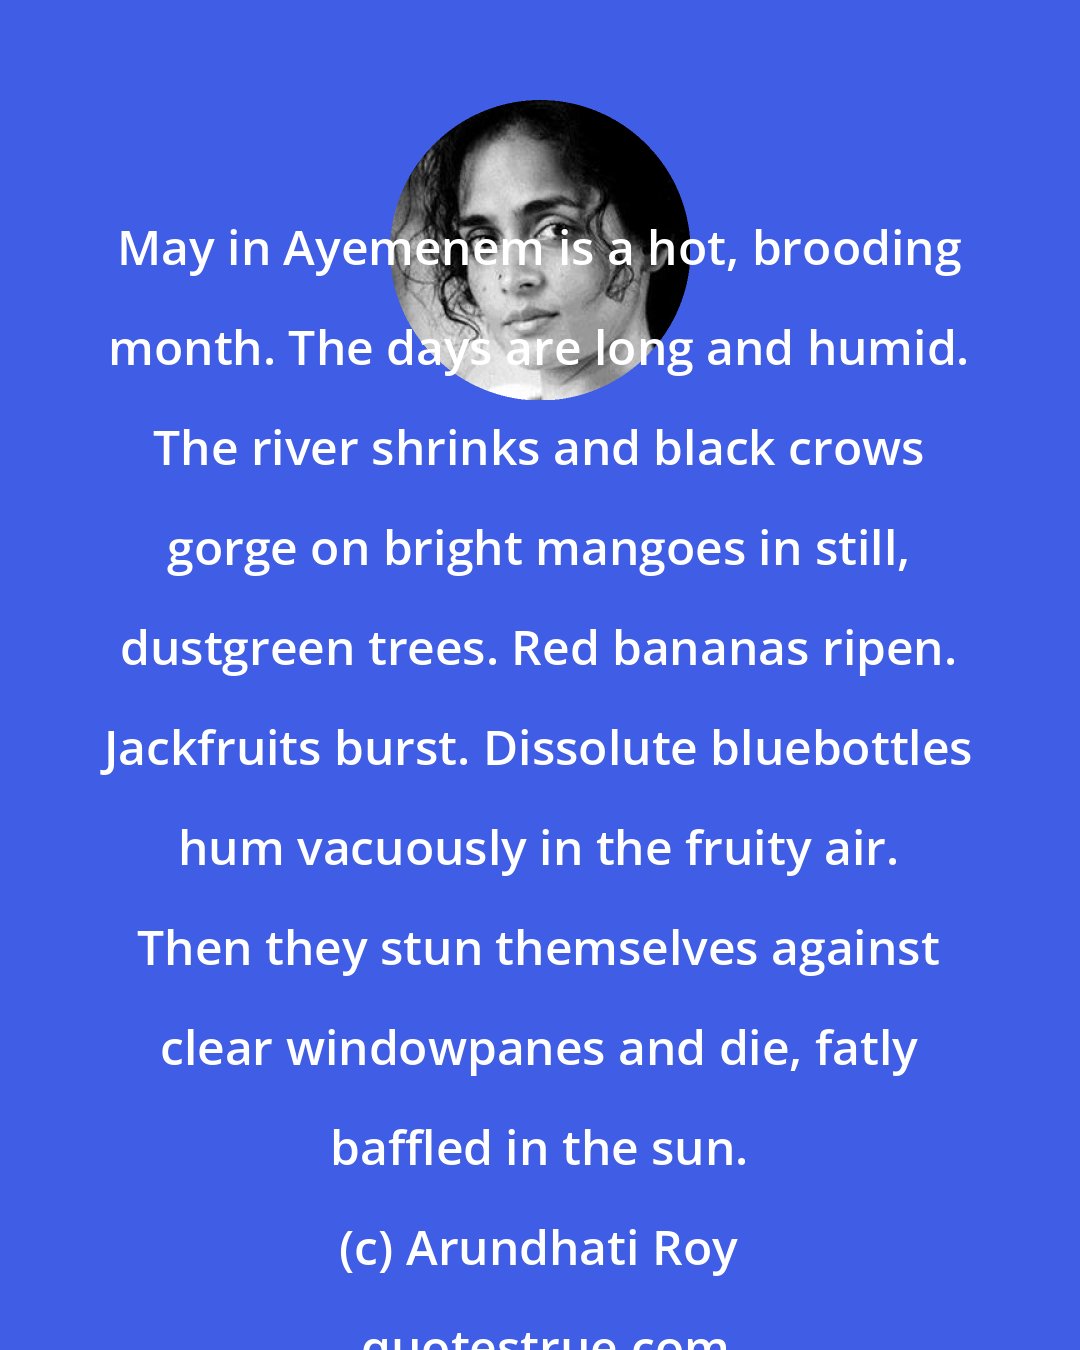 Arundhati Roy: May in Ayemenem is a hot, brooding month. The days are long and humid. The river shrinks and black crows gorge on bright mangoes in still, dustgreen trees. Red bananas ripen. Jackfruits burst. Dissolute bluebottles hum vacuously in the fruity air. Then they stun themselves against clear windowpanes and die, fatly baffled in the sun.